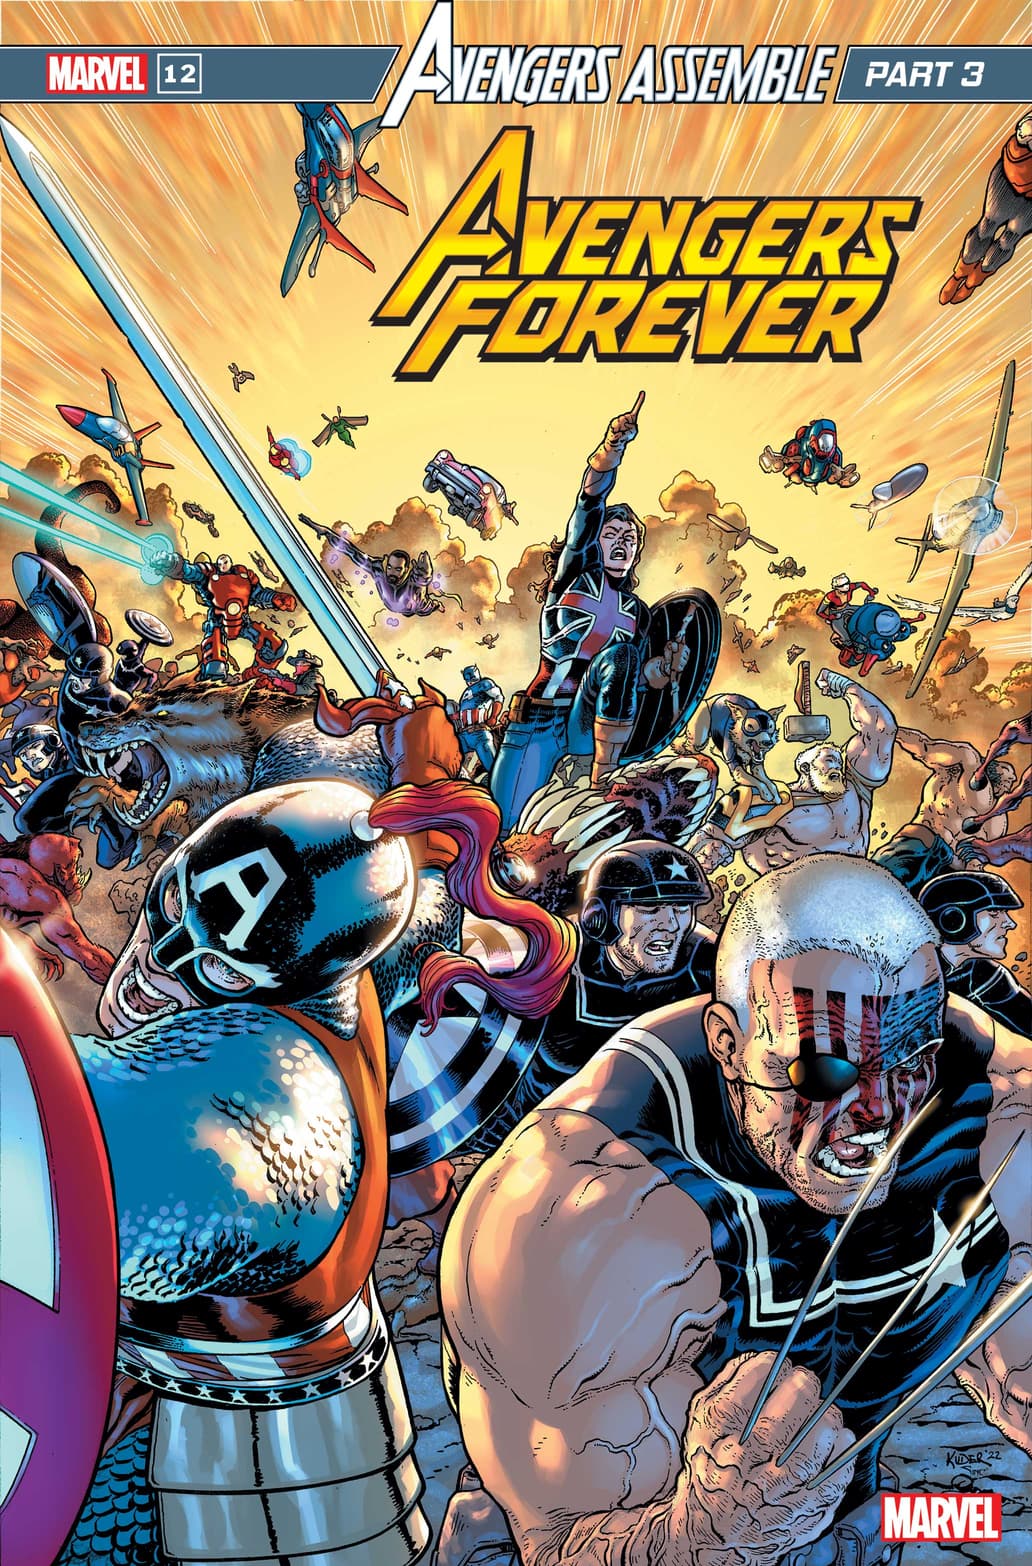 AVENGERS FOREVER #12 Cover by AARON KUDER